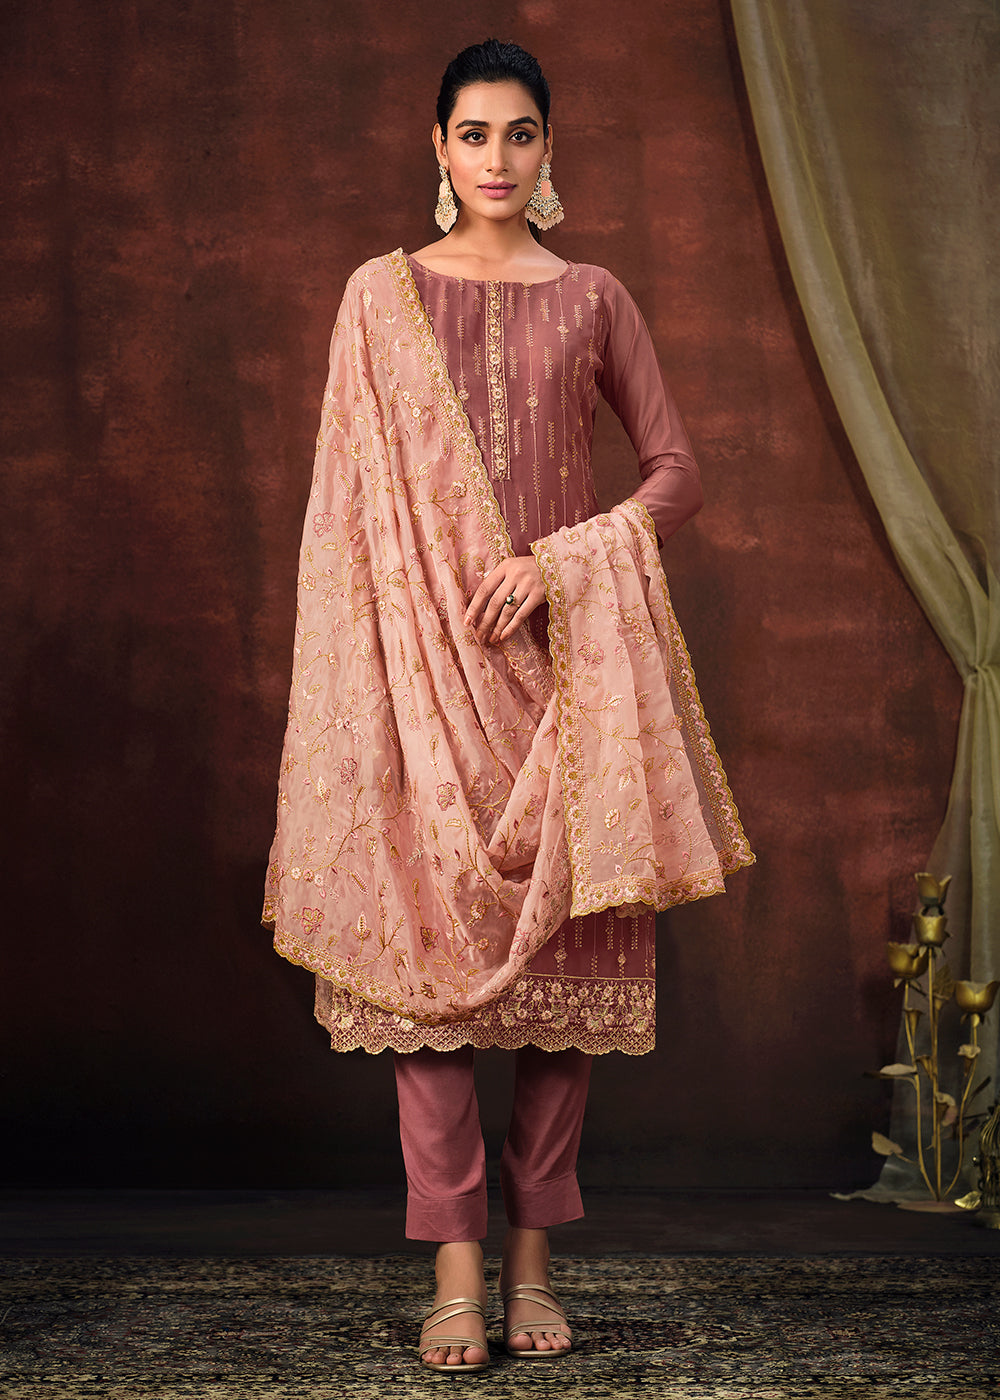 Buy Now Taupe Mauve Shimmer Organza Embroidered Salwar Suit Online in USA, UK, Canada, Germany, Australia & Worldwide at Empress Clothing.